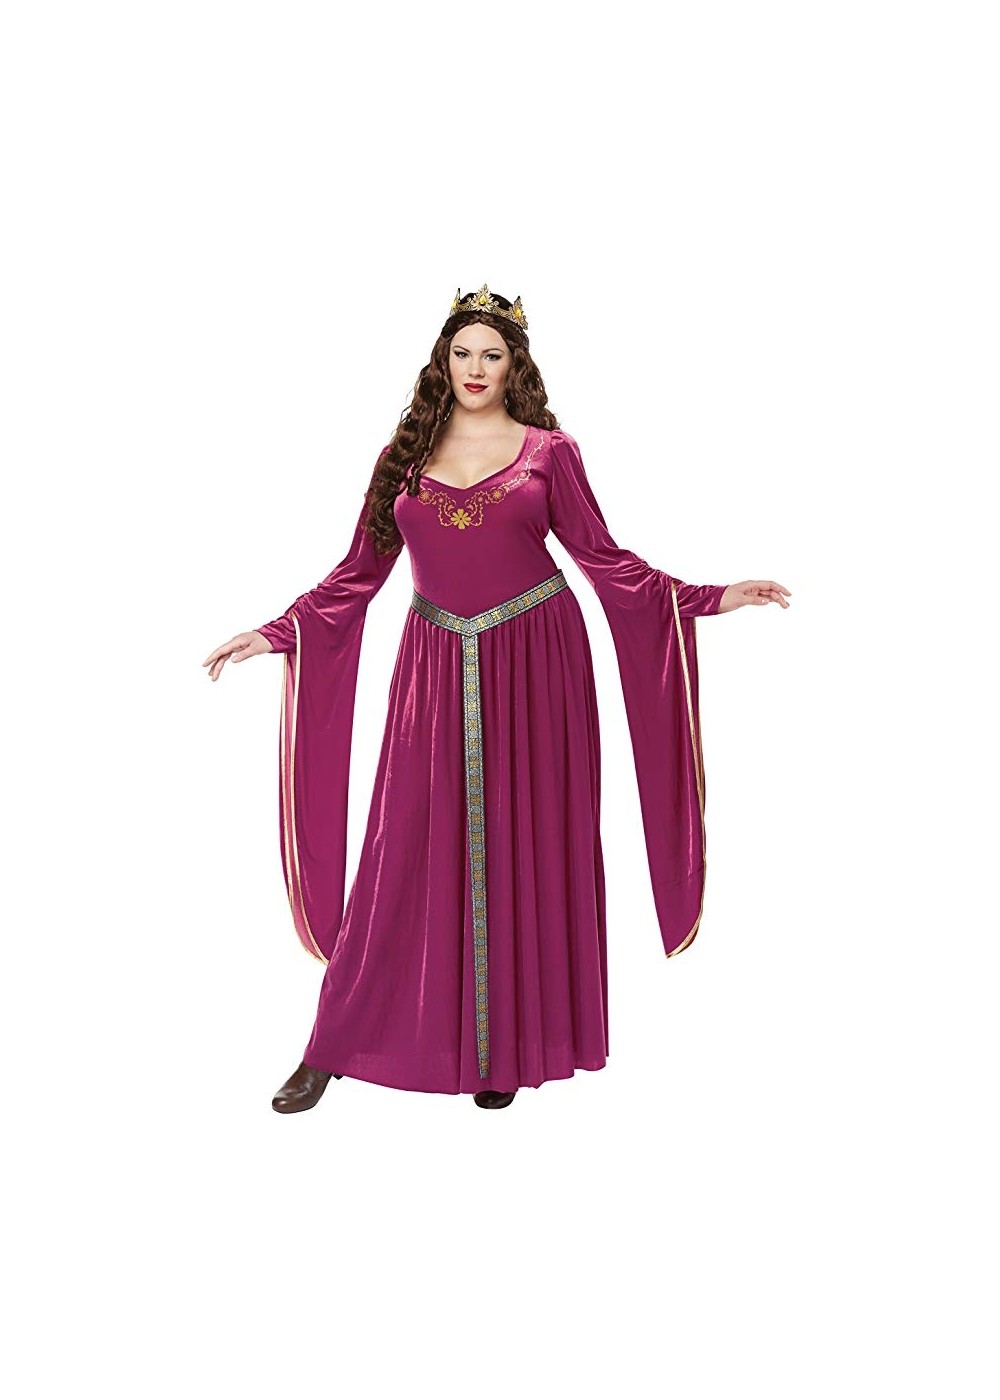 Lady Guinevere Costume